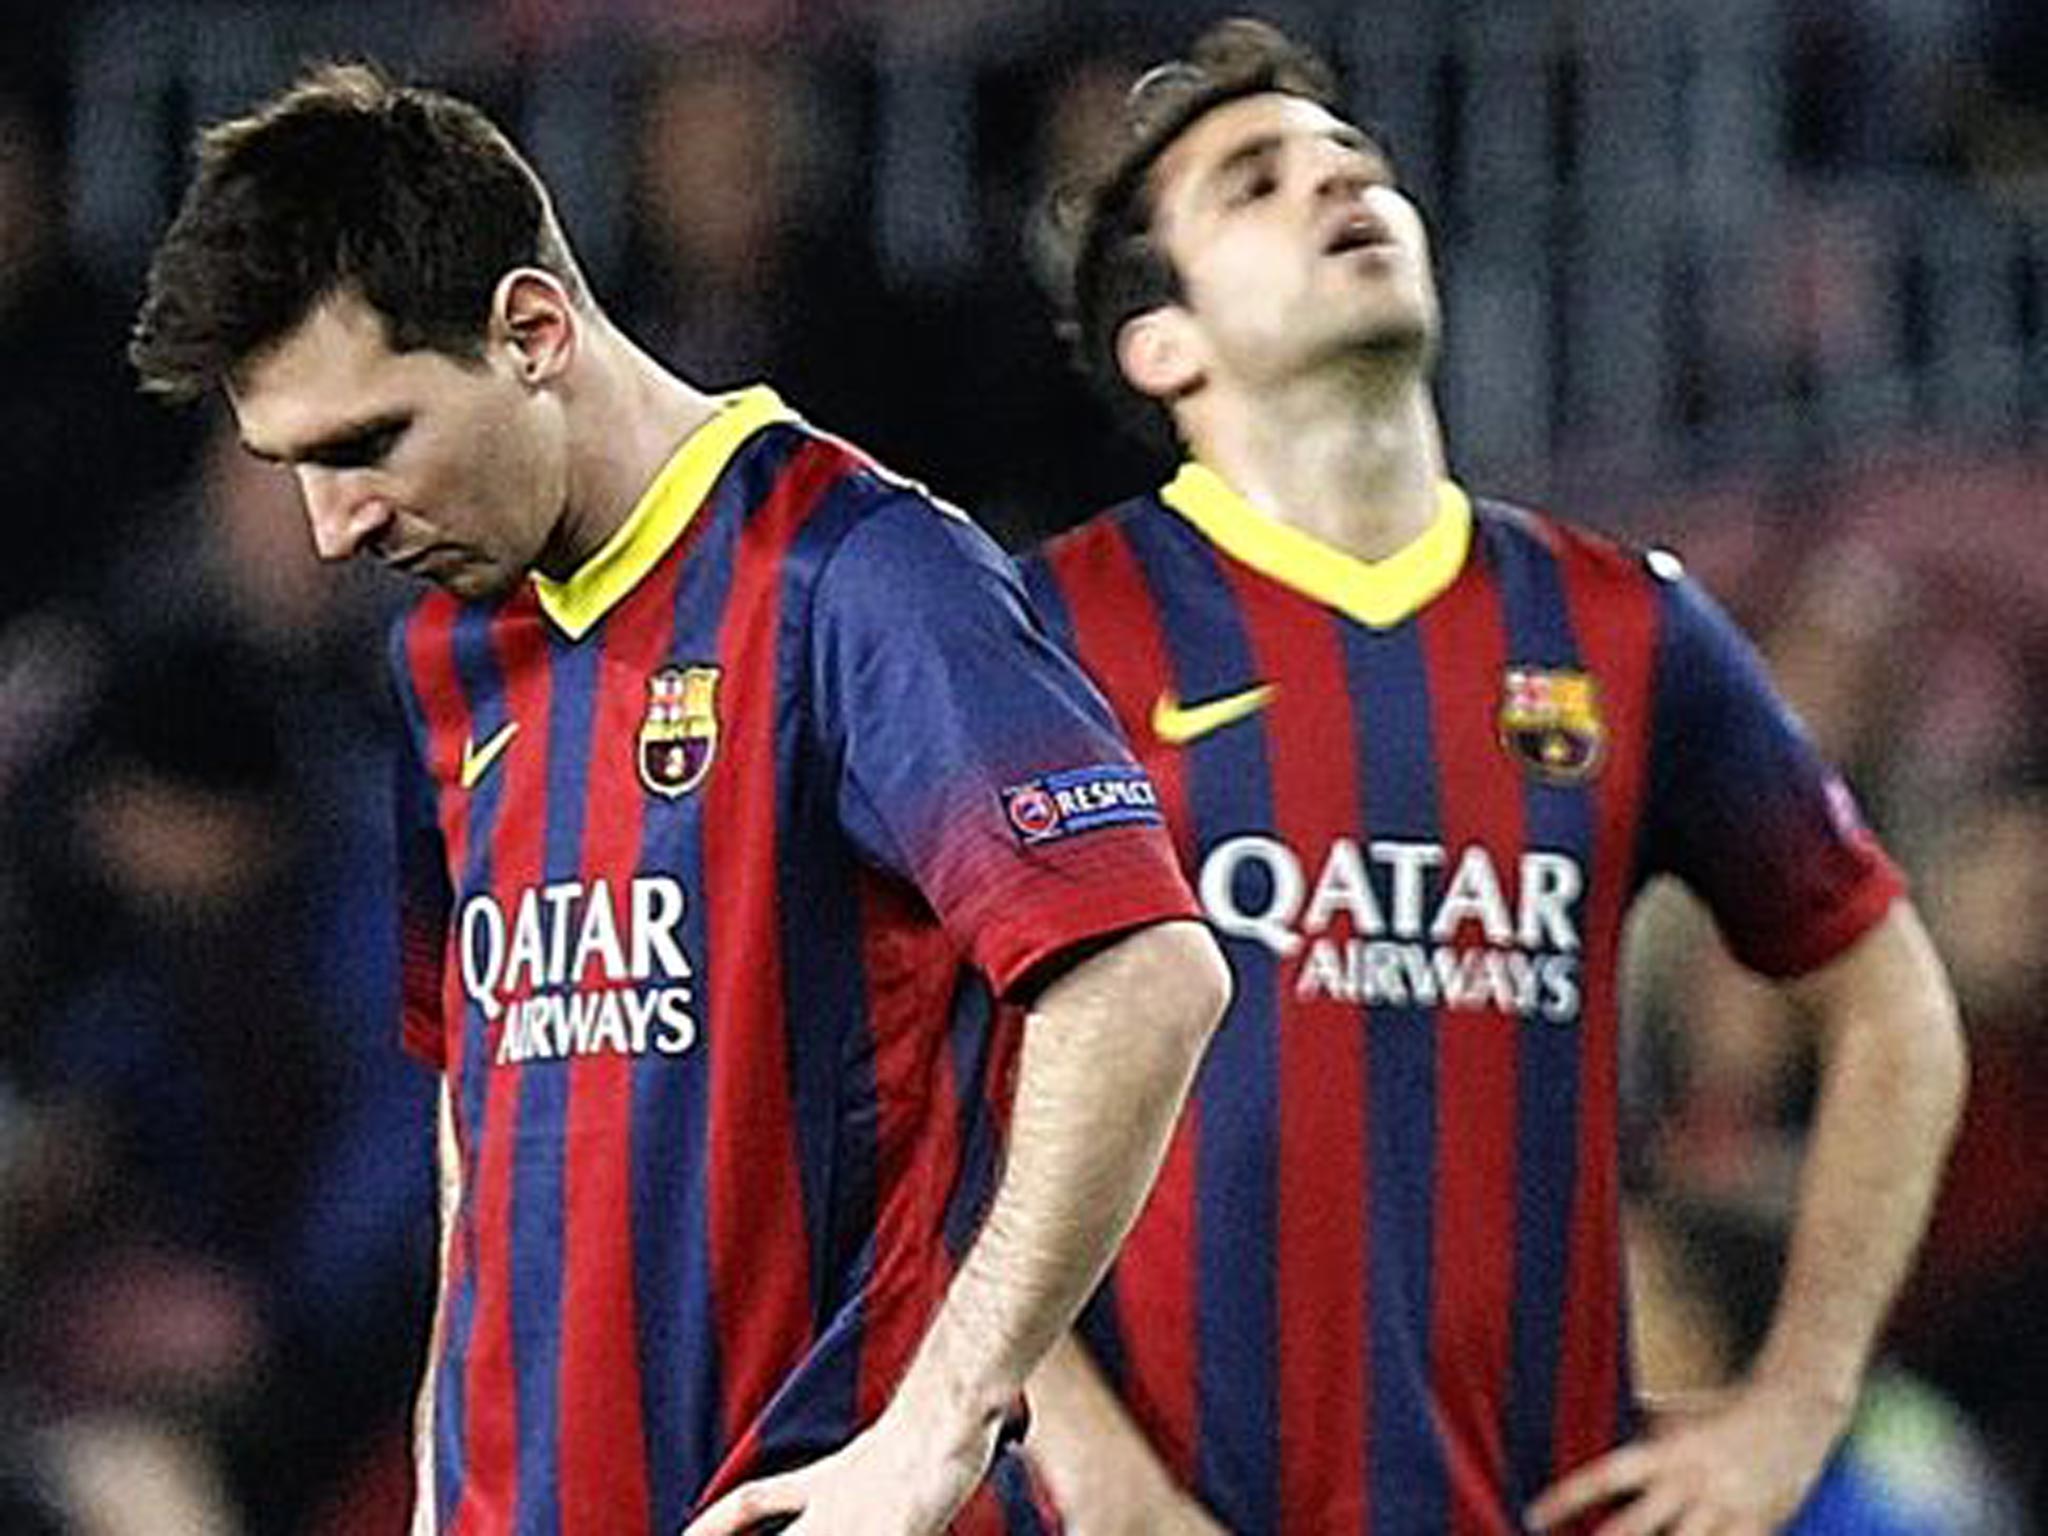 Lionel Messi and Cesc Fabregas hang their heads during Barcelona’s draw against Atletico Madrid